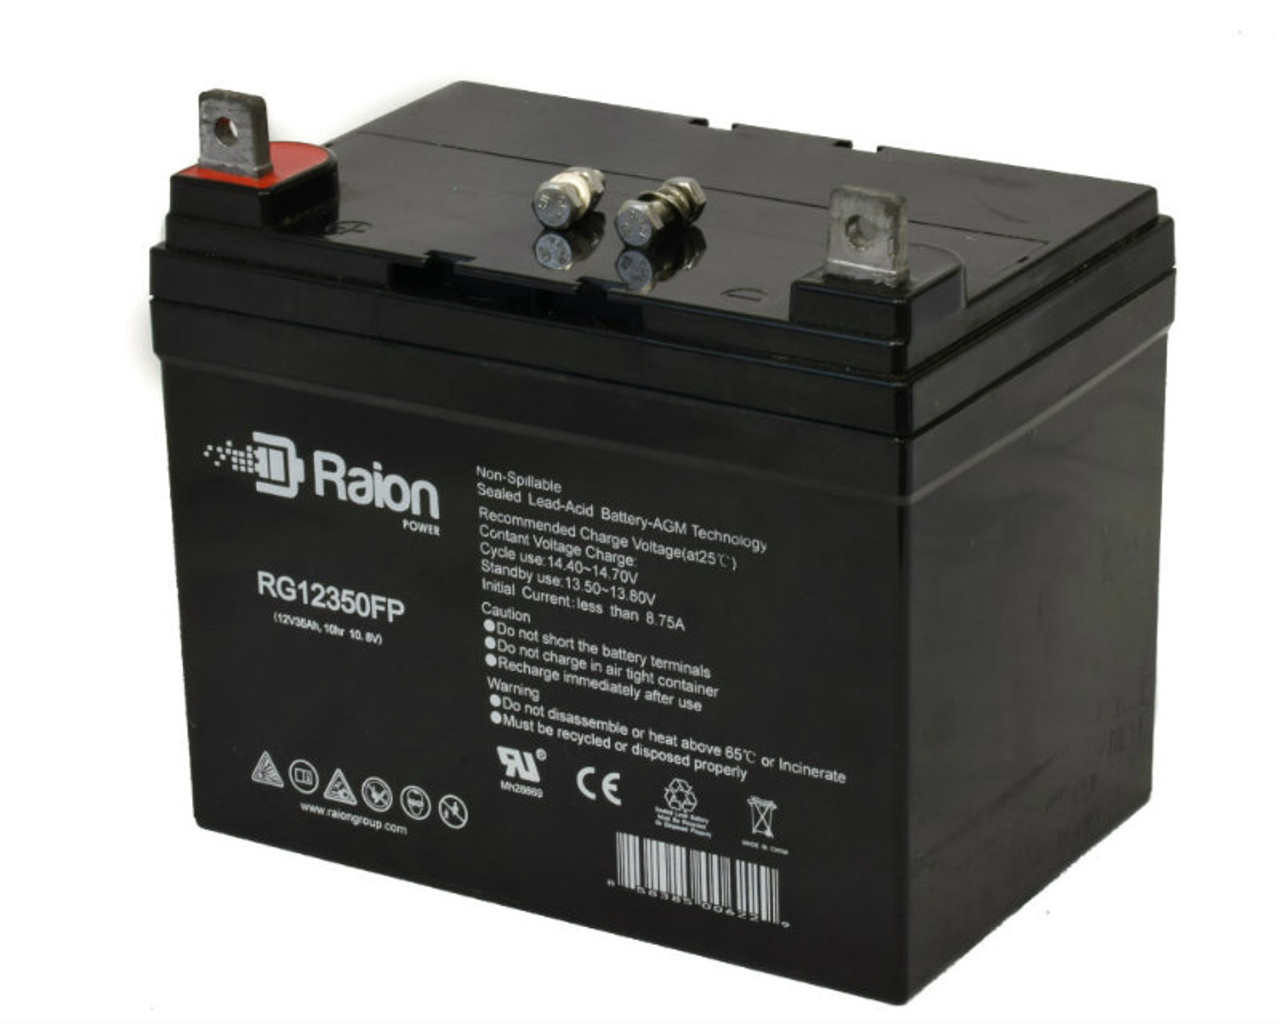 Raion Power Replacement 12V 35Ah Battery for Saft PD12270 - 1 Pack